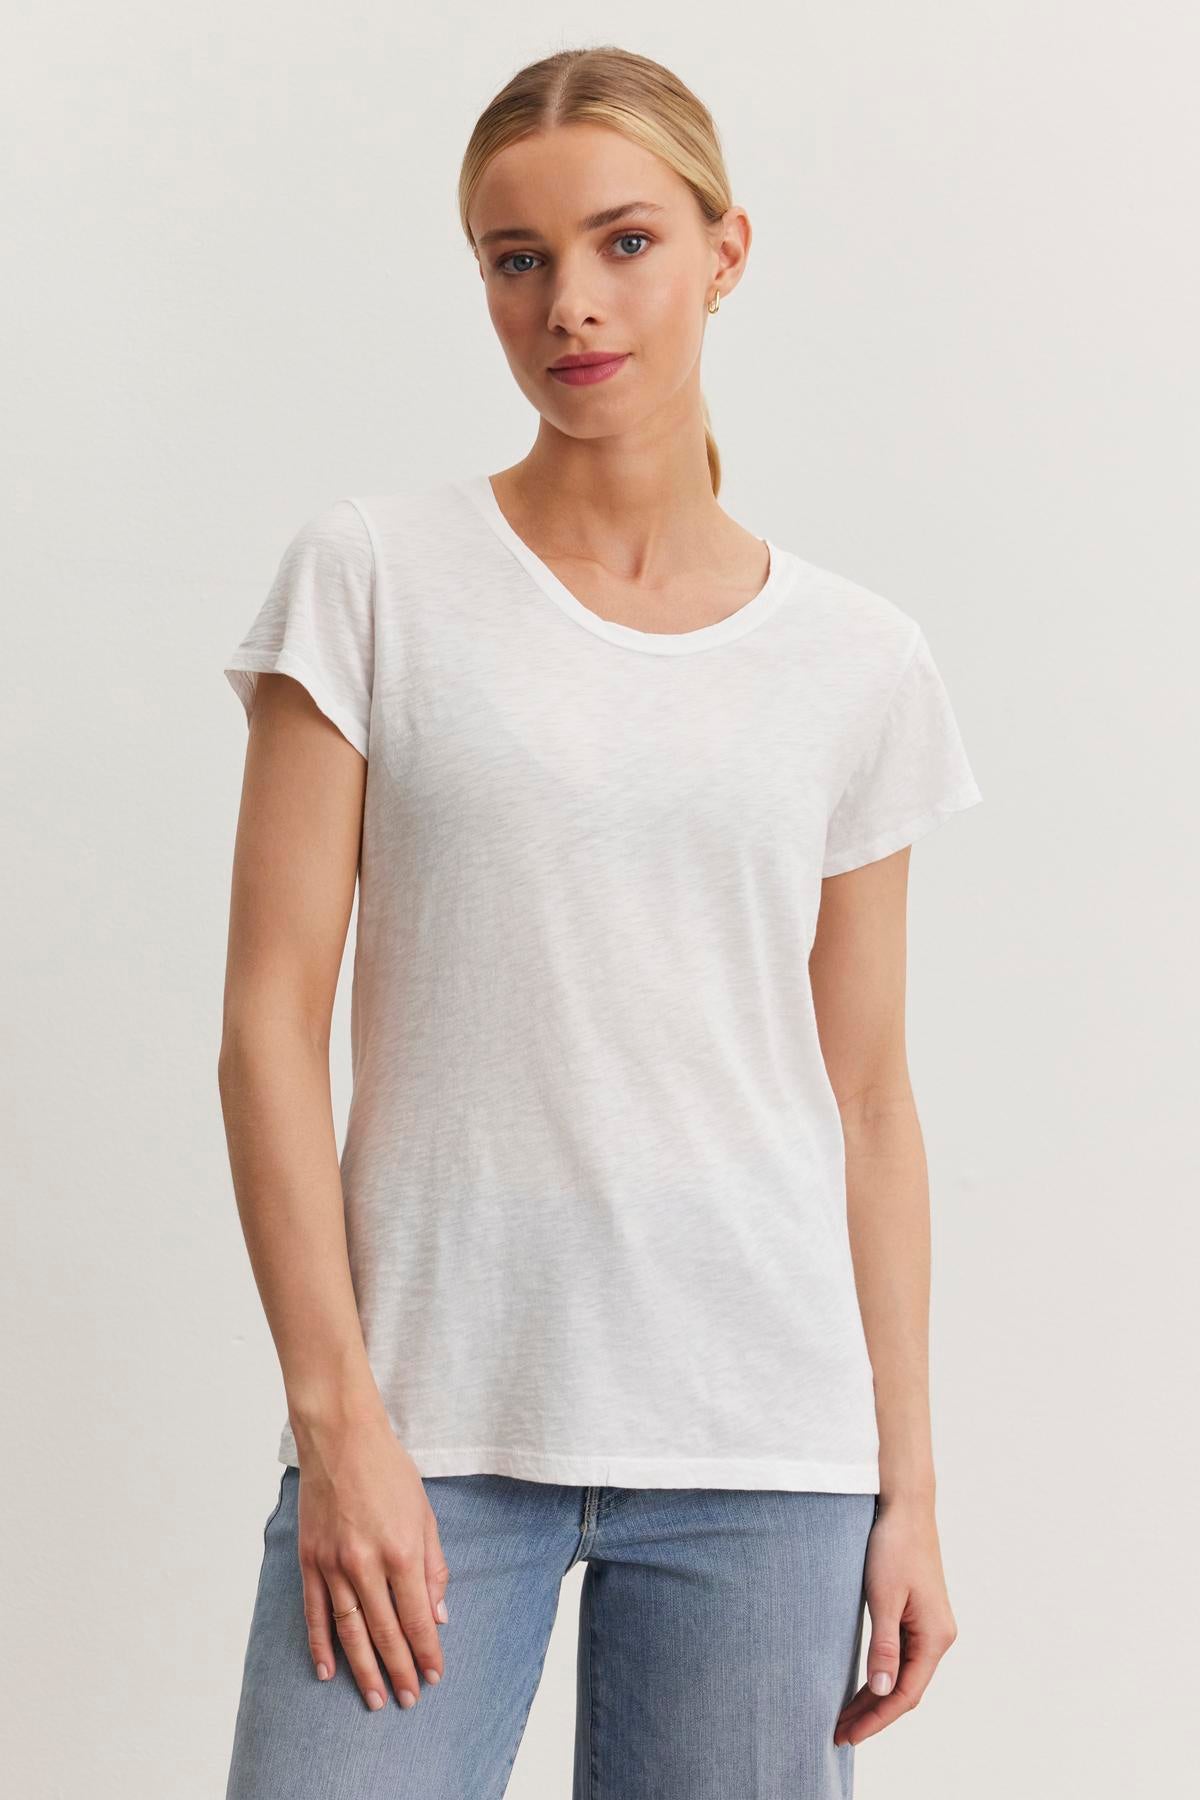 A woman with blonde hair stands against a plain background, wearing the ODELIA TEE by Velvet by Graham & Spencer, a versatile white short-sleeve t-shirt made from premium cotton slub fabric, and blue jeans.-37366925918401